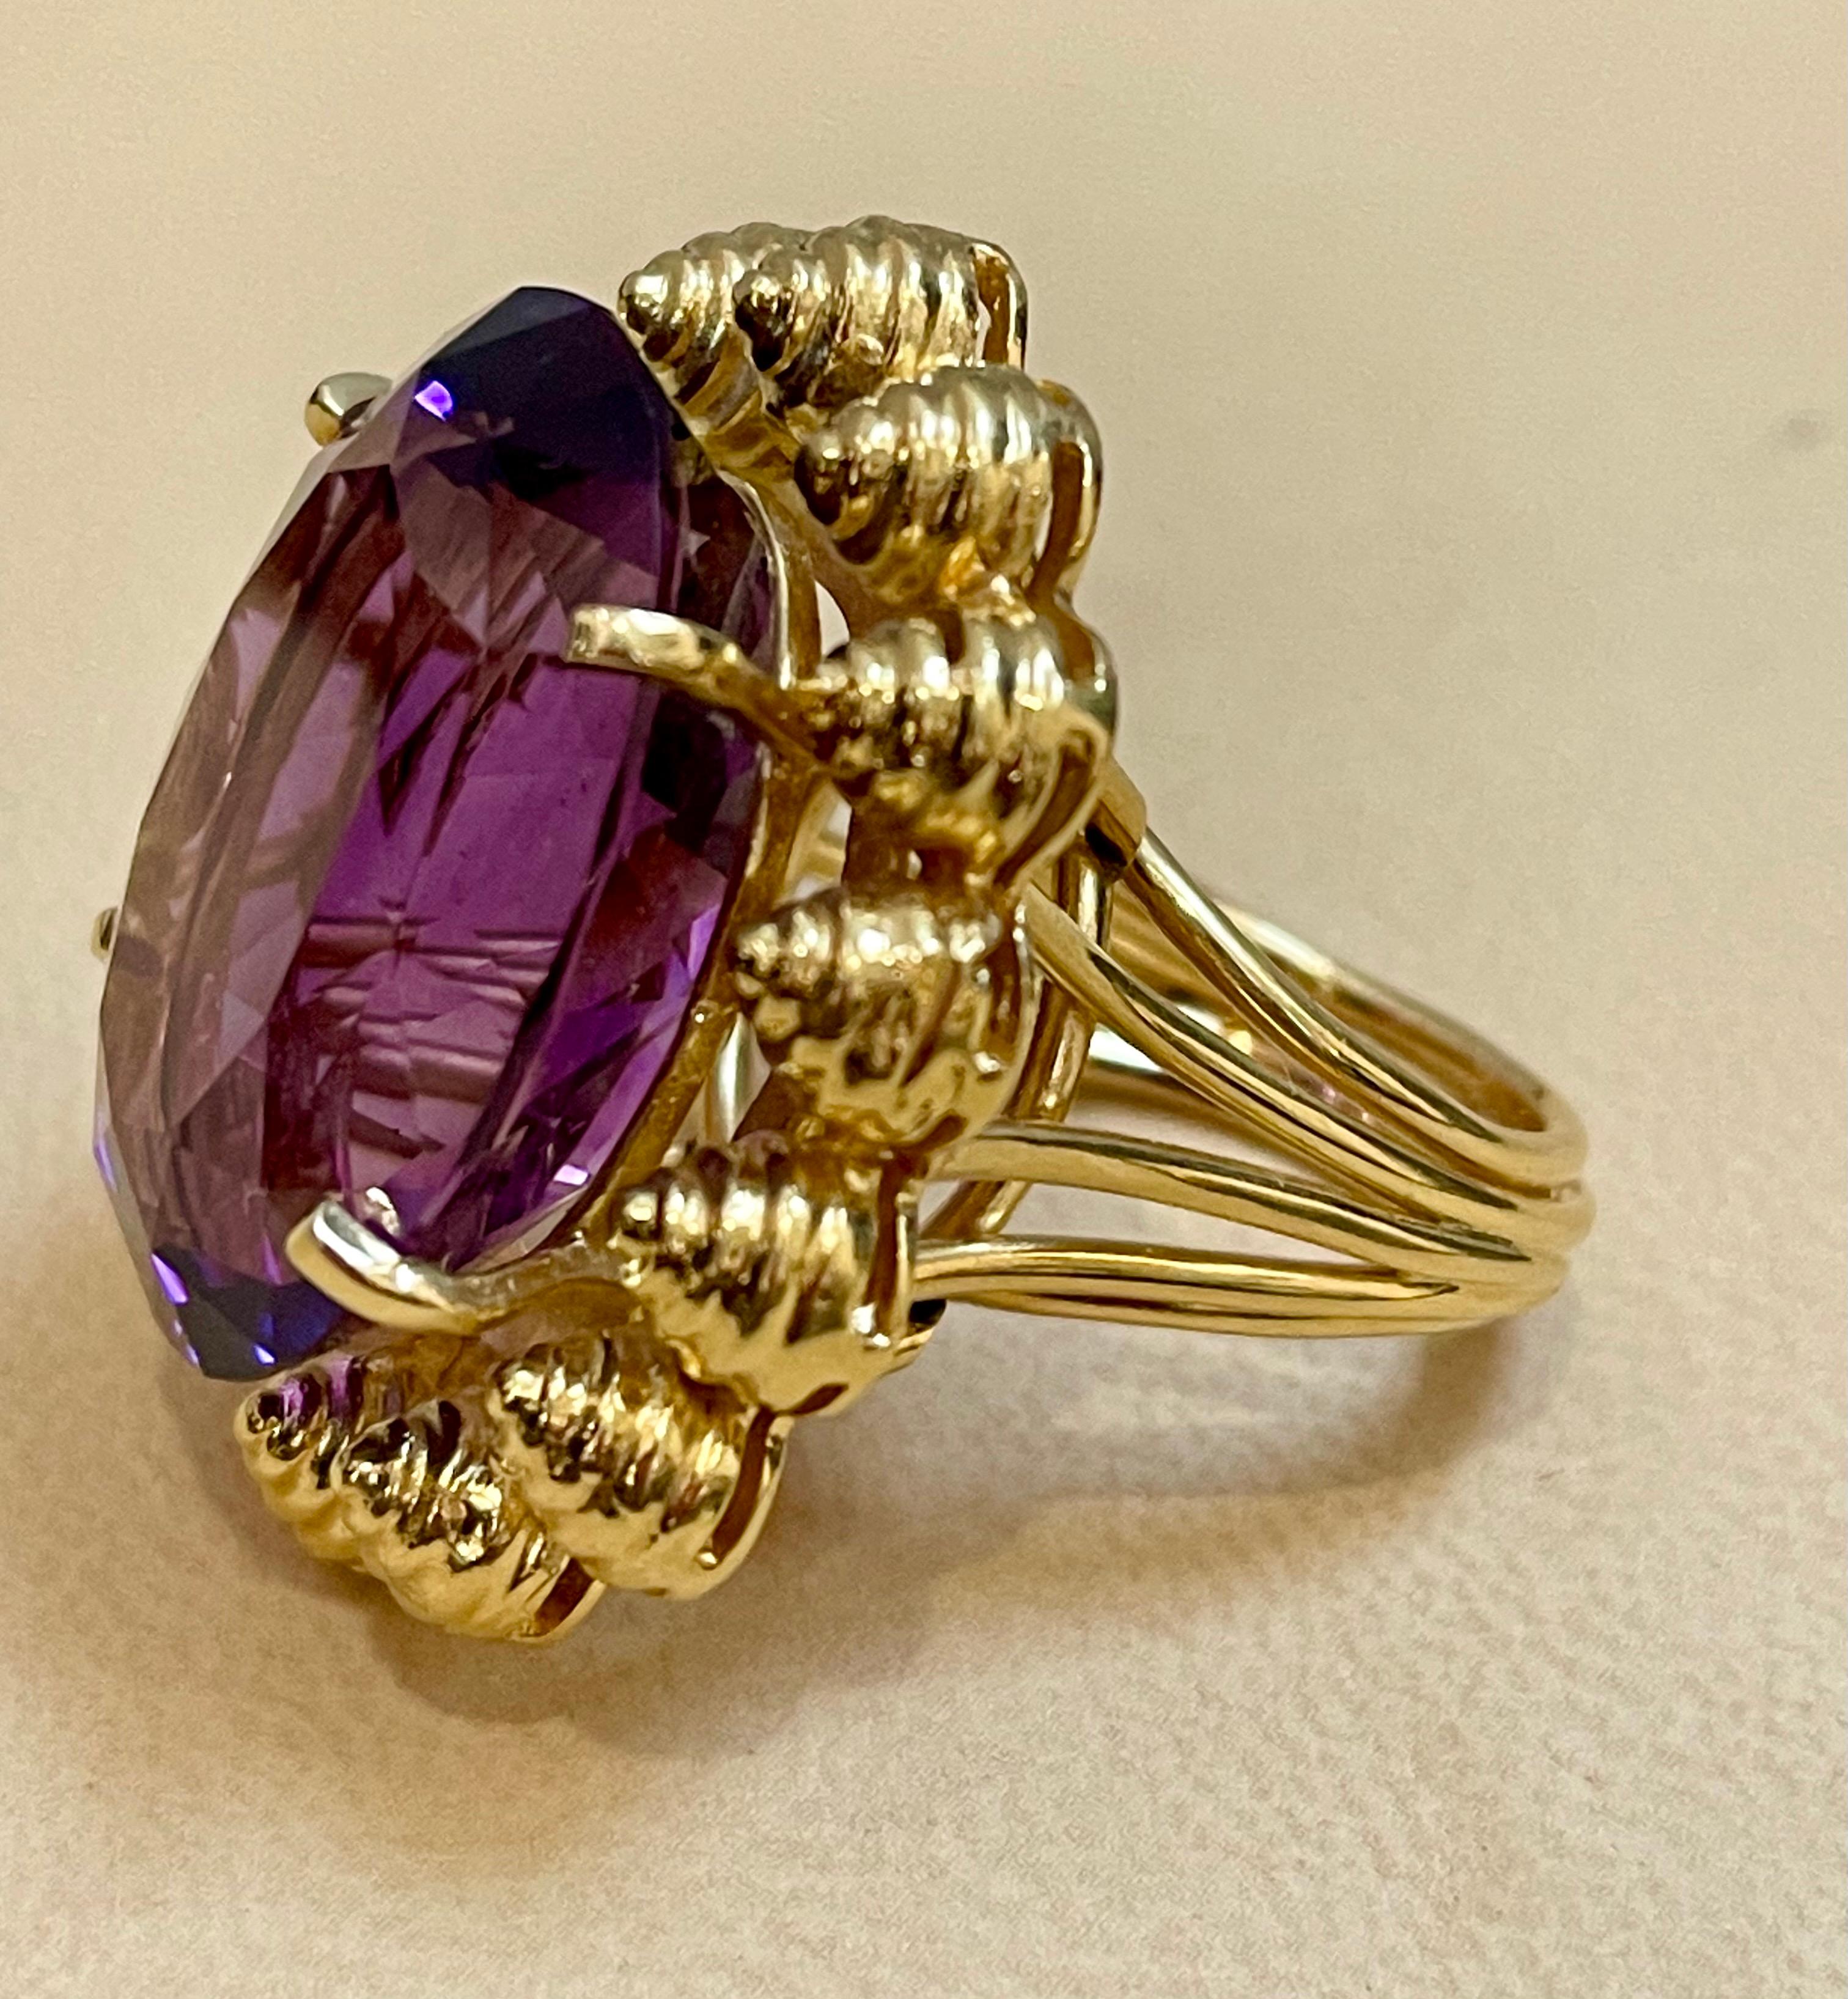 50 Carat Amethyst Cocktail Ring in Solid 18 Karat Yellow Gold 29 Grams In Excellent Condition For Sale In New York, NY